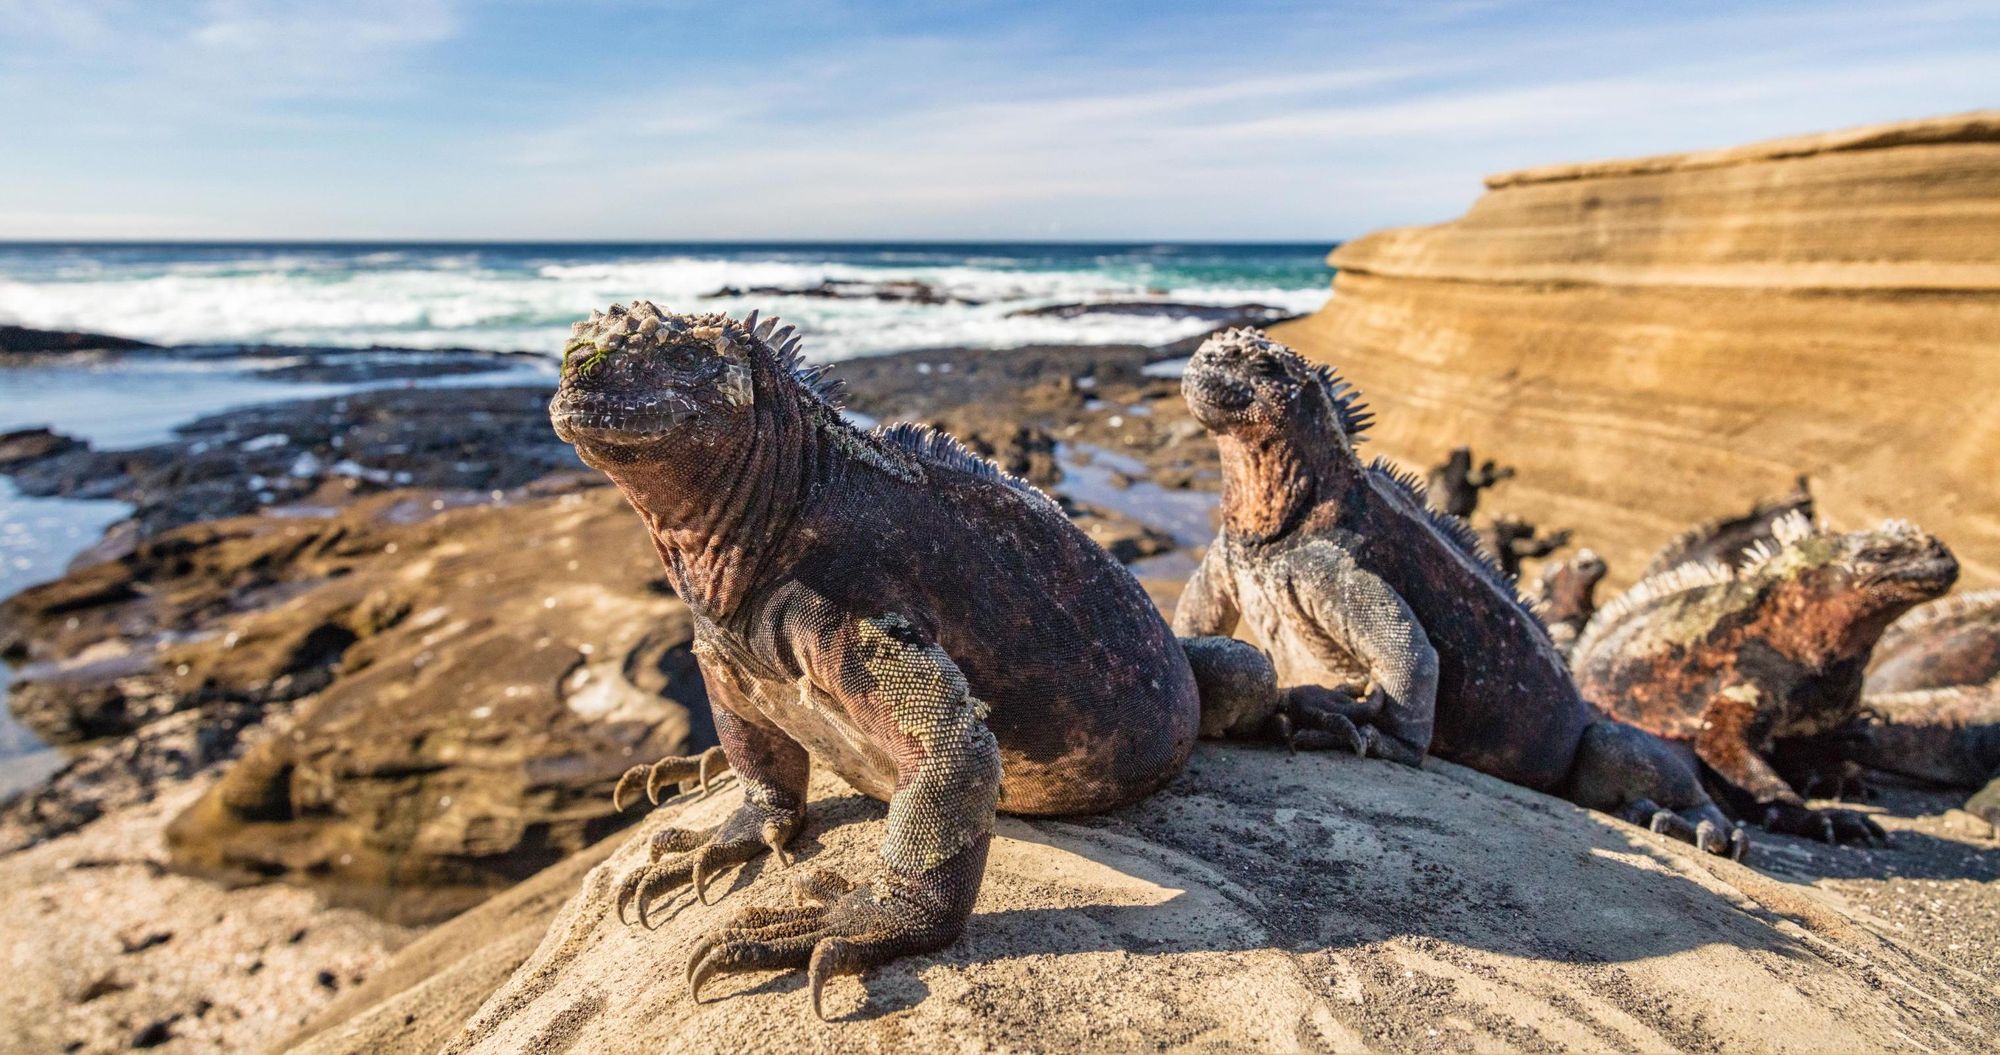 Iguanas sitting on a rock on the Galapagos Islands. Photo: Getty